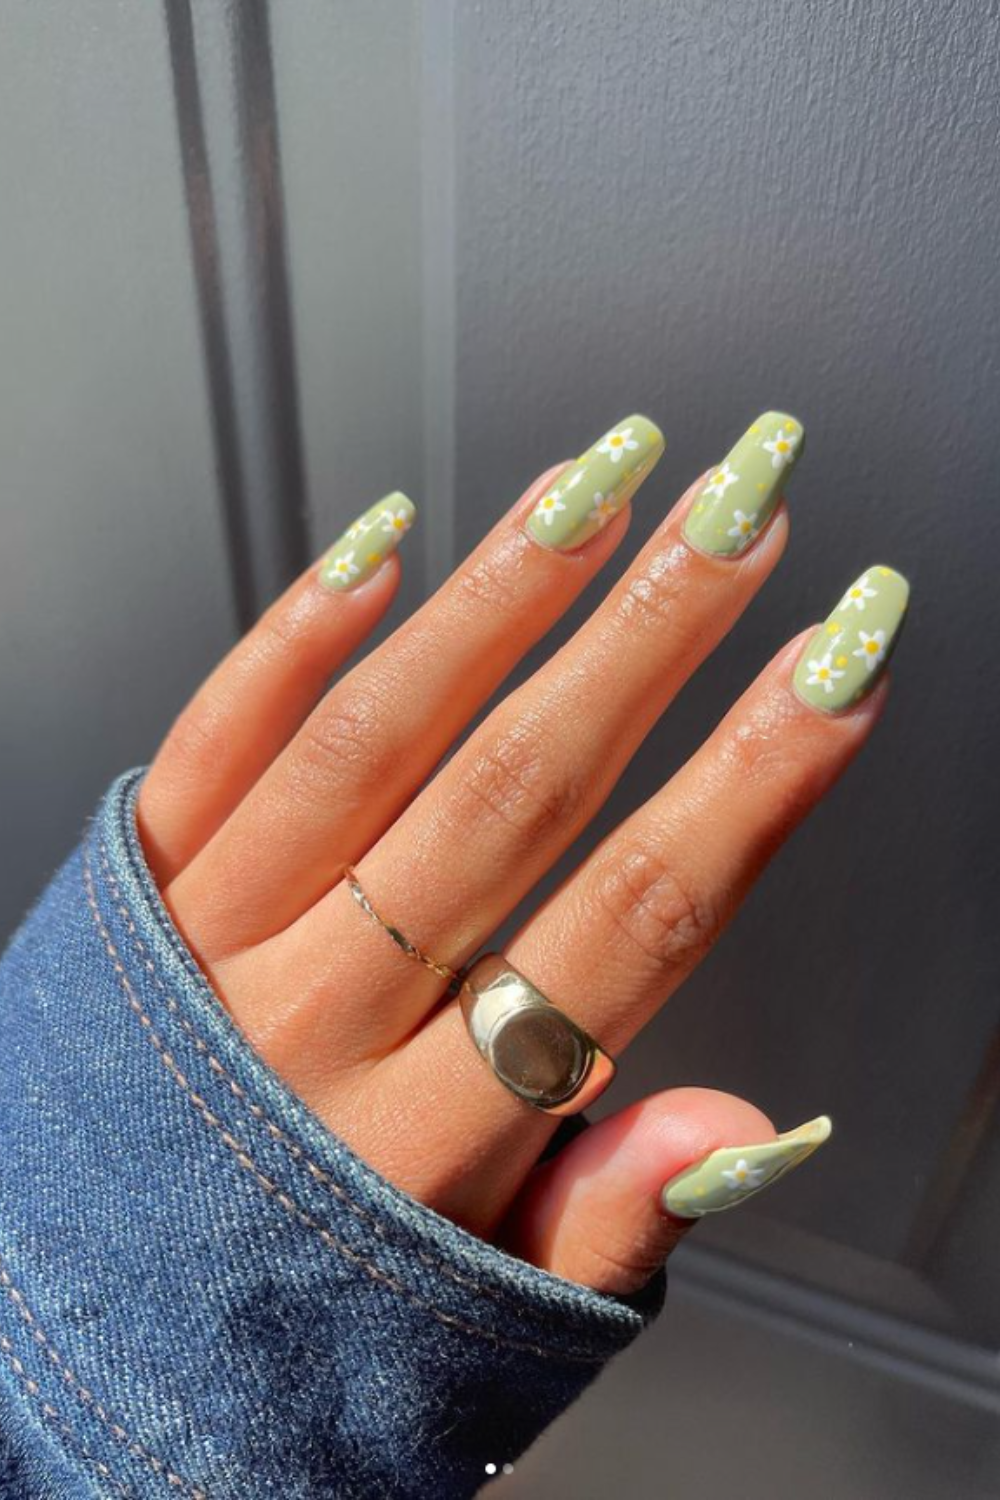 Brown Aesthetic Nails 🤎 | Gallery posted by Cecilia Yen | Lemon8